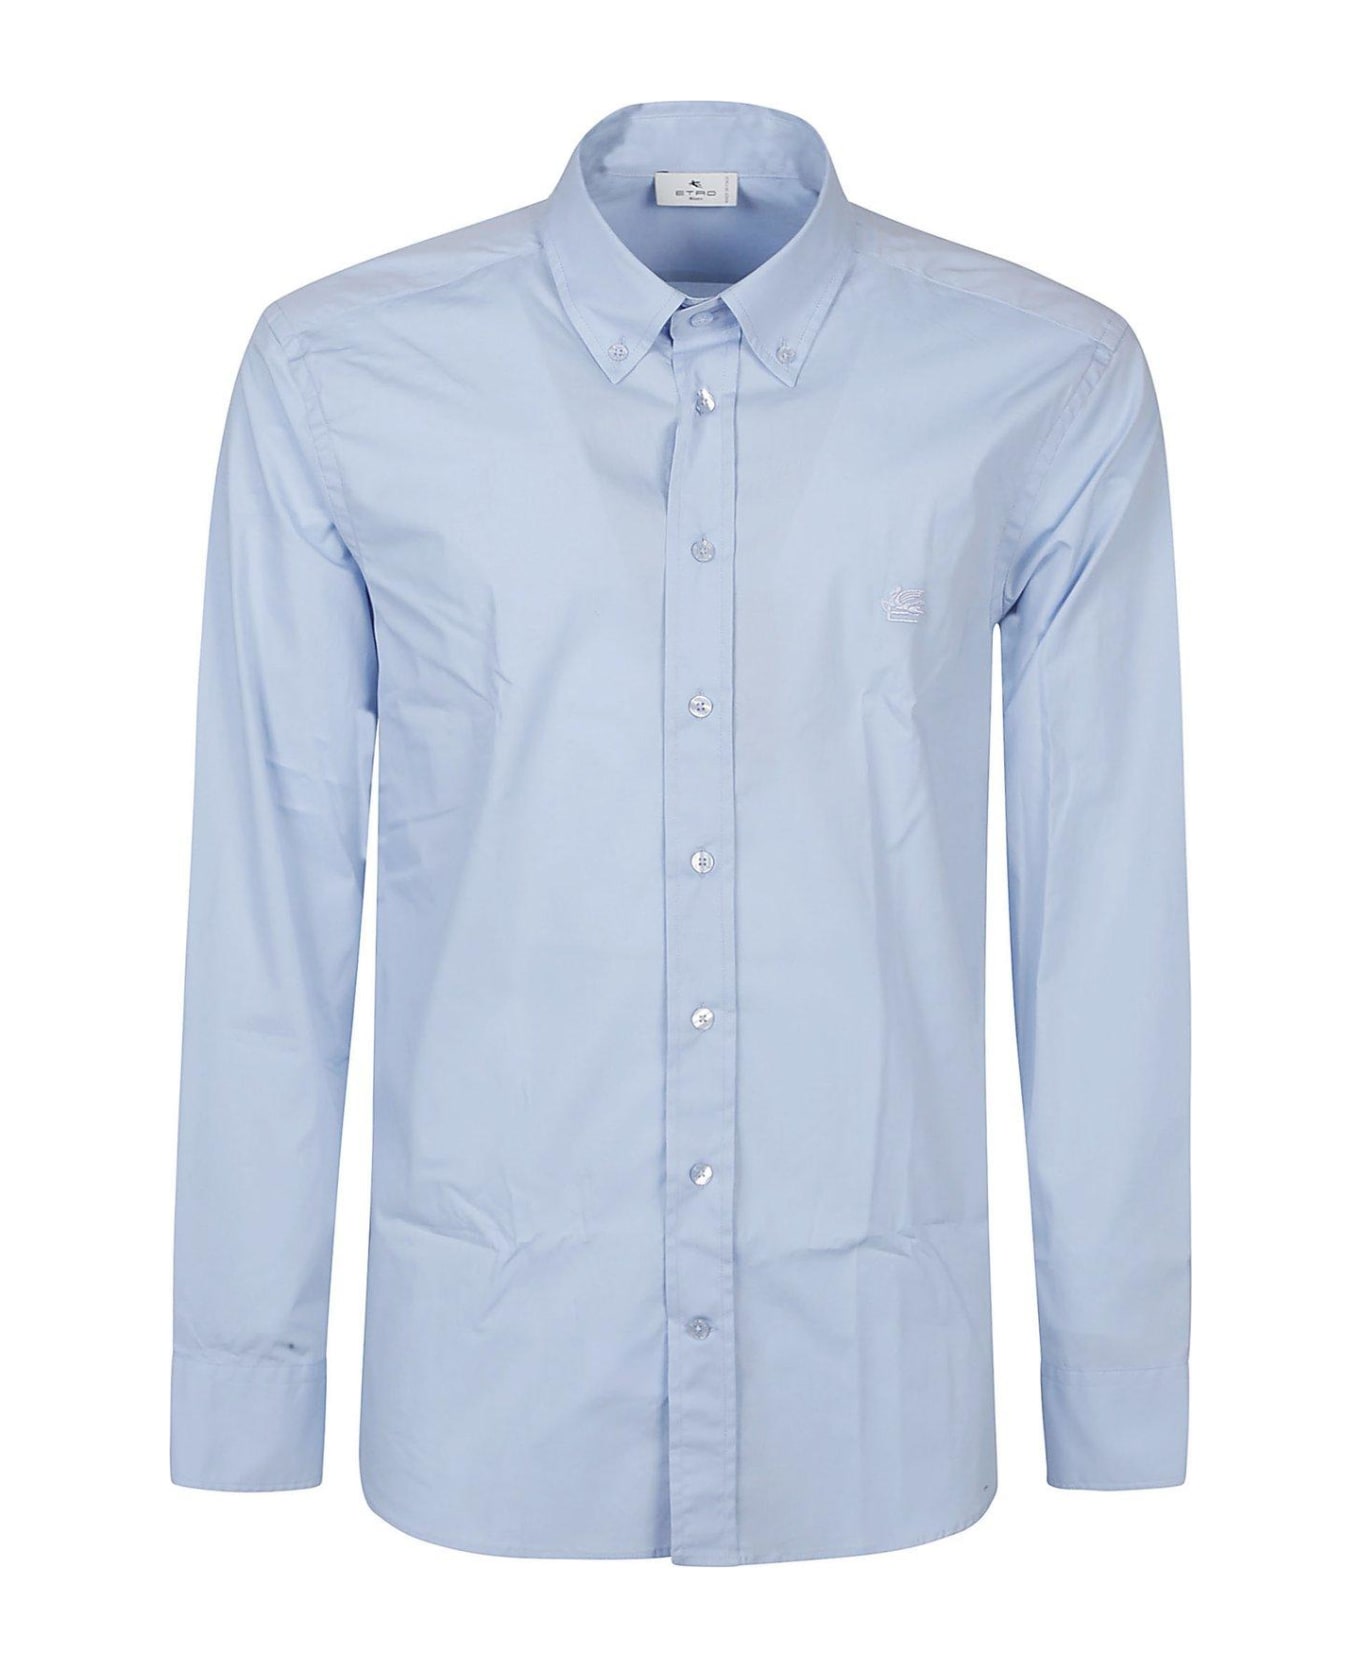 Etro Pegaso Embroidered Buttoned Shirt - Clear Blue シャツ